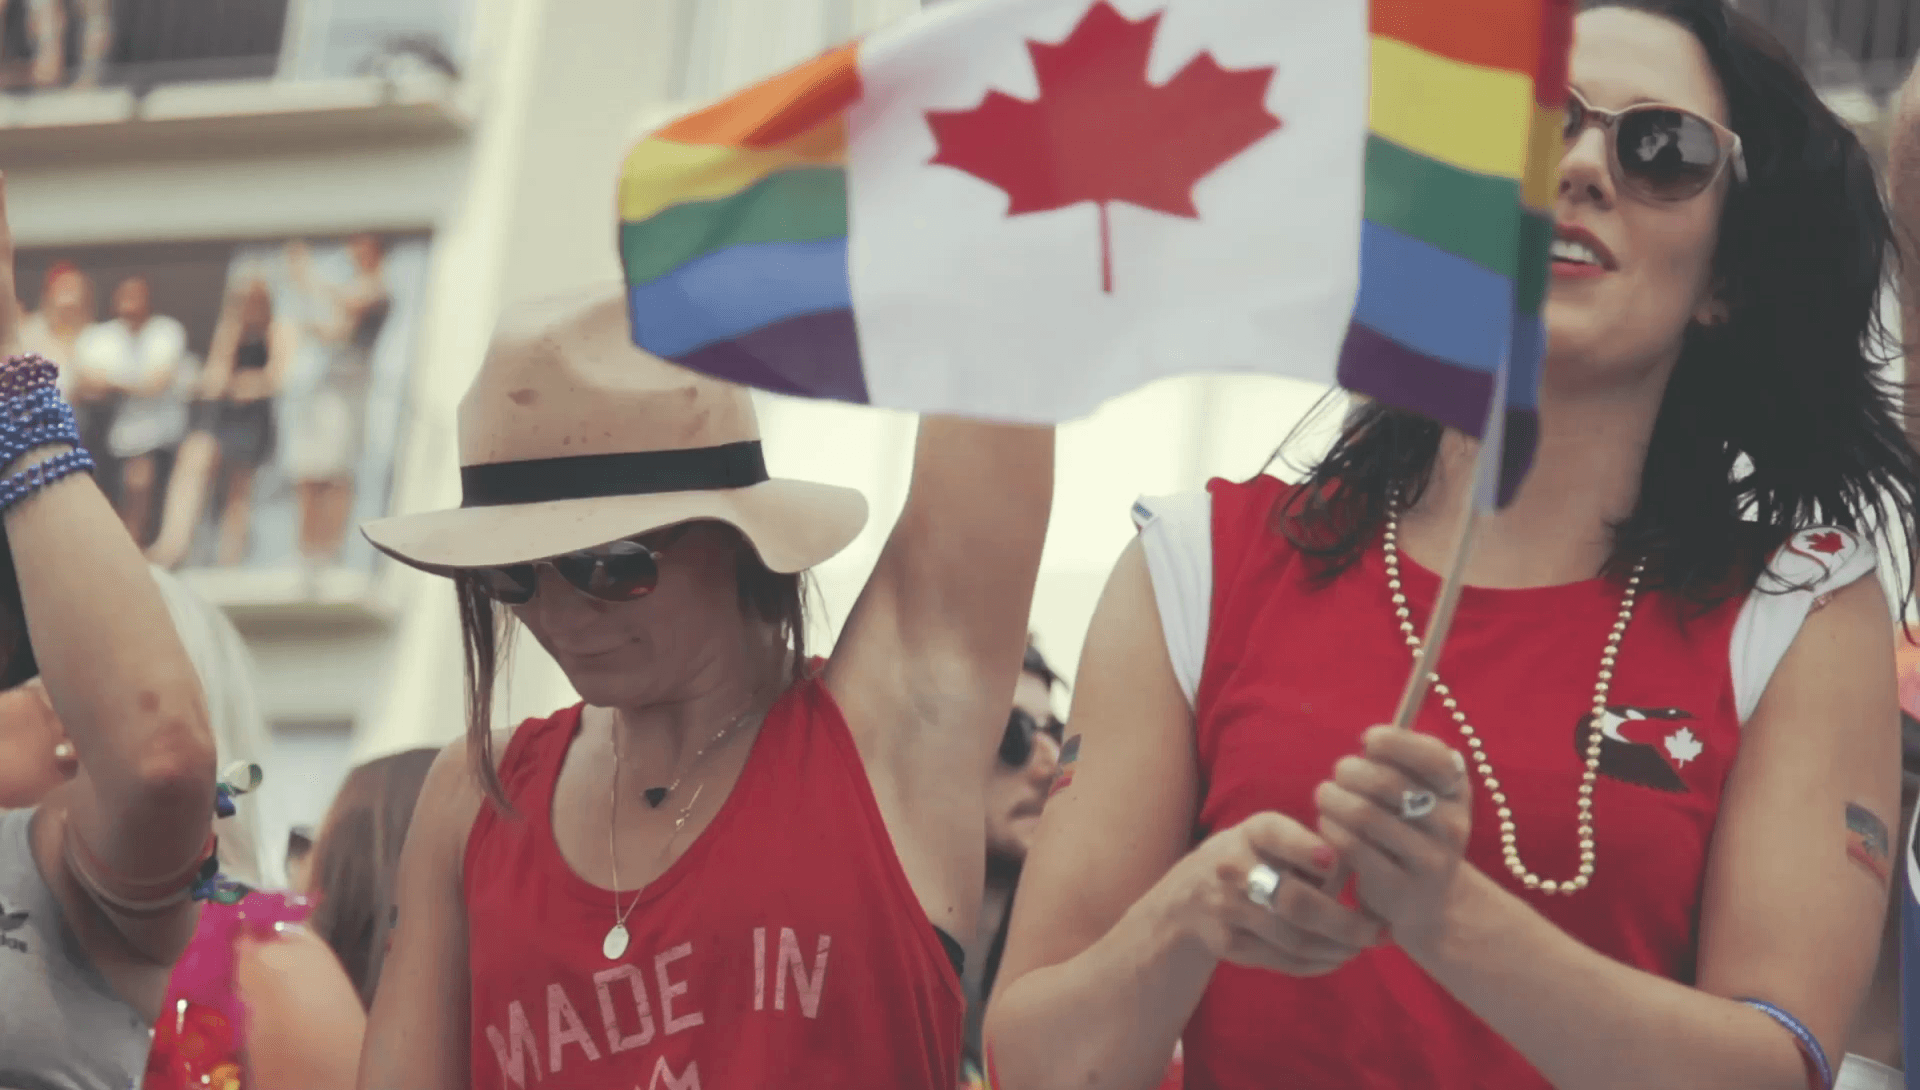 A woman waves a Canadian flag with pride colors